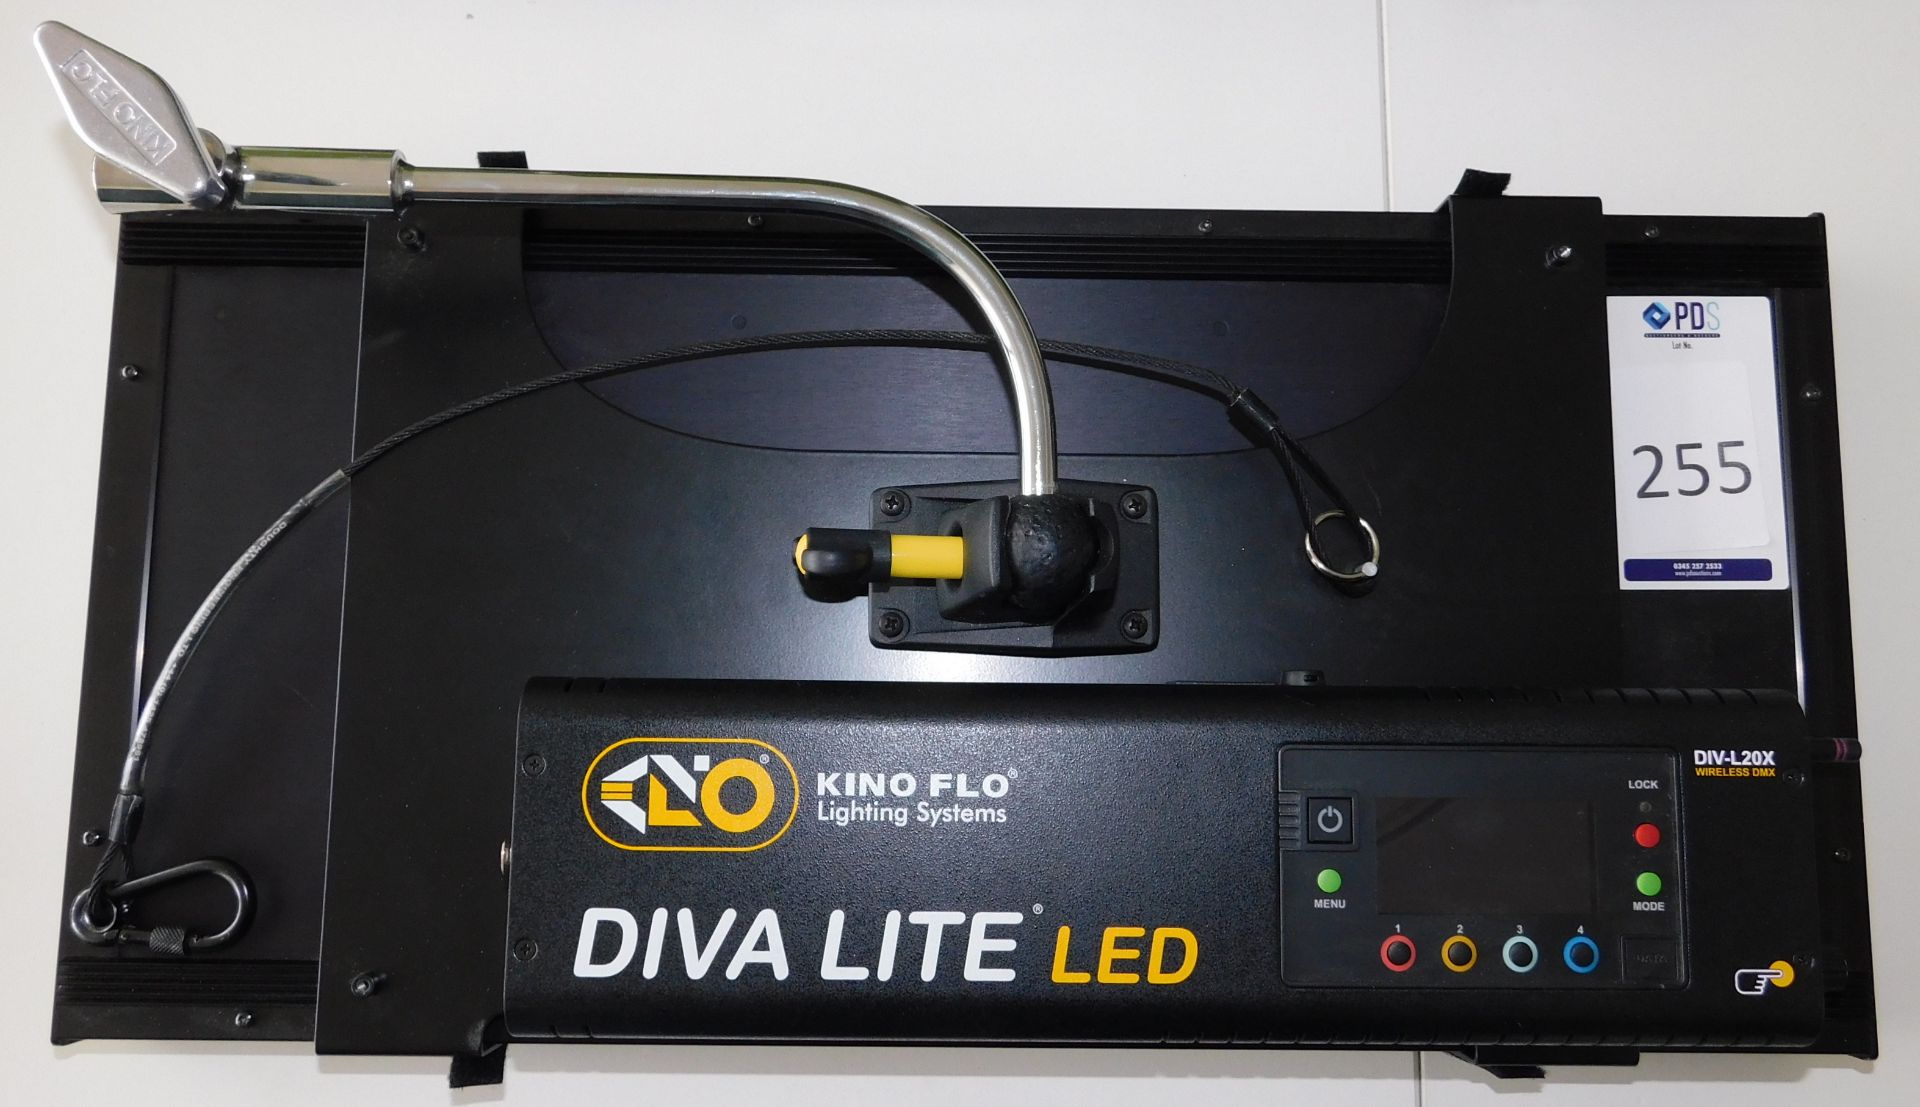 Kino Flo DIV-L20X Diva Lite LED (Location: Westminster. Please Refer to General Notes) - Image 2 of 3